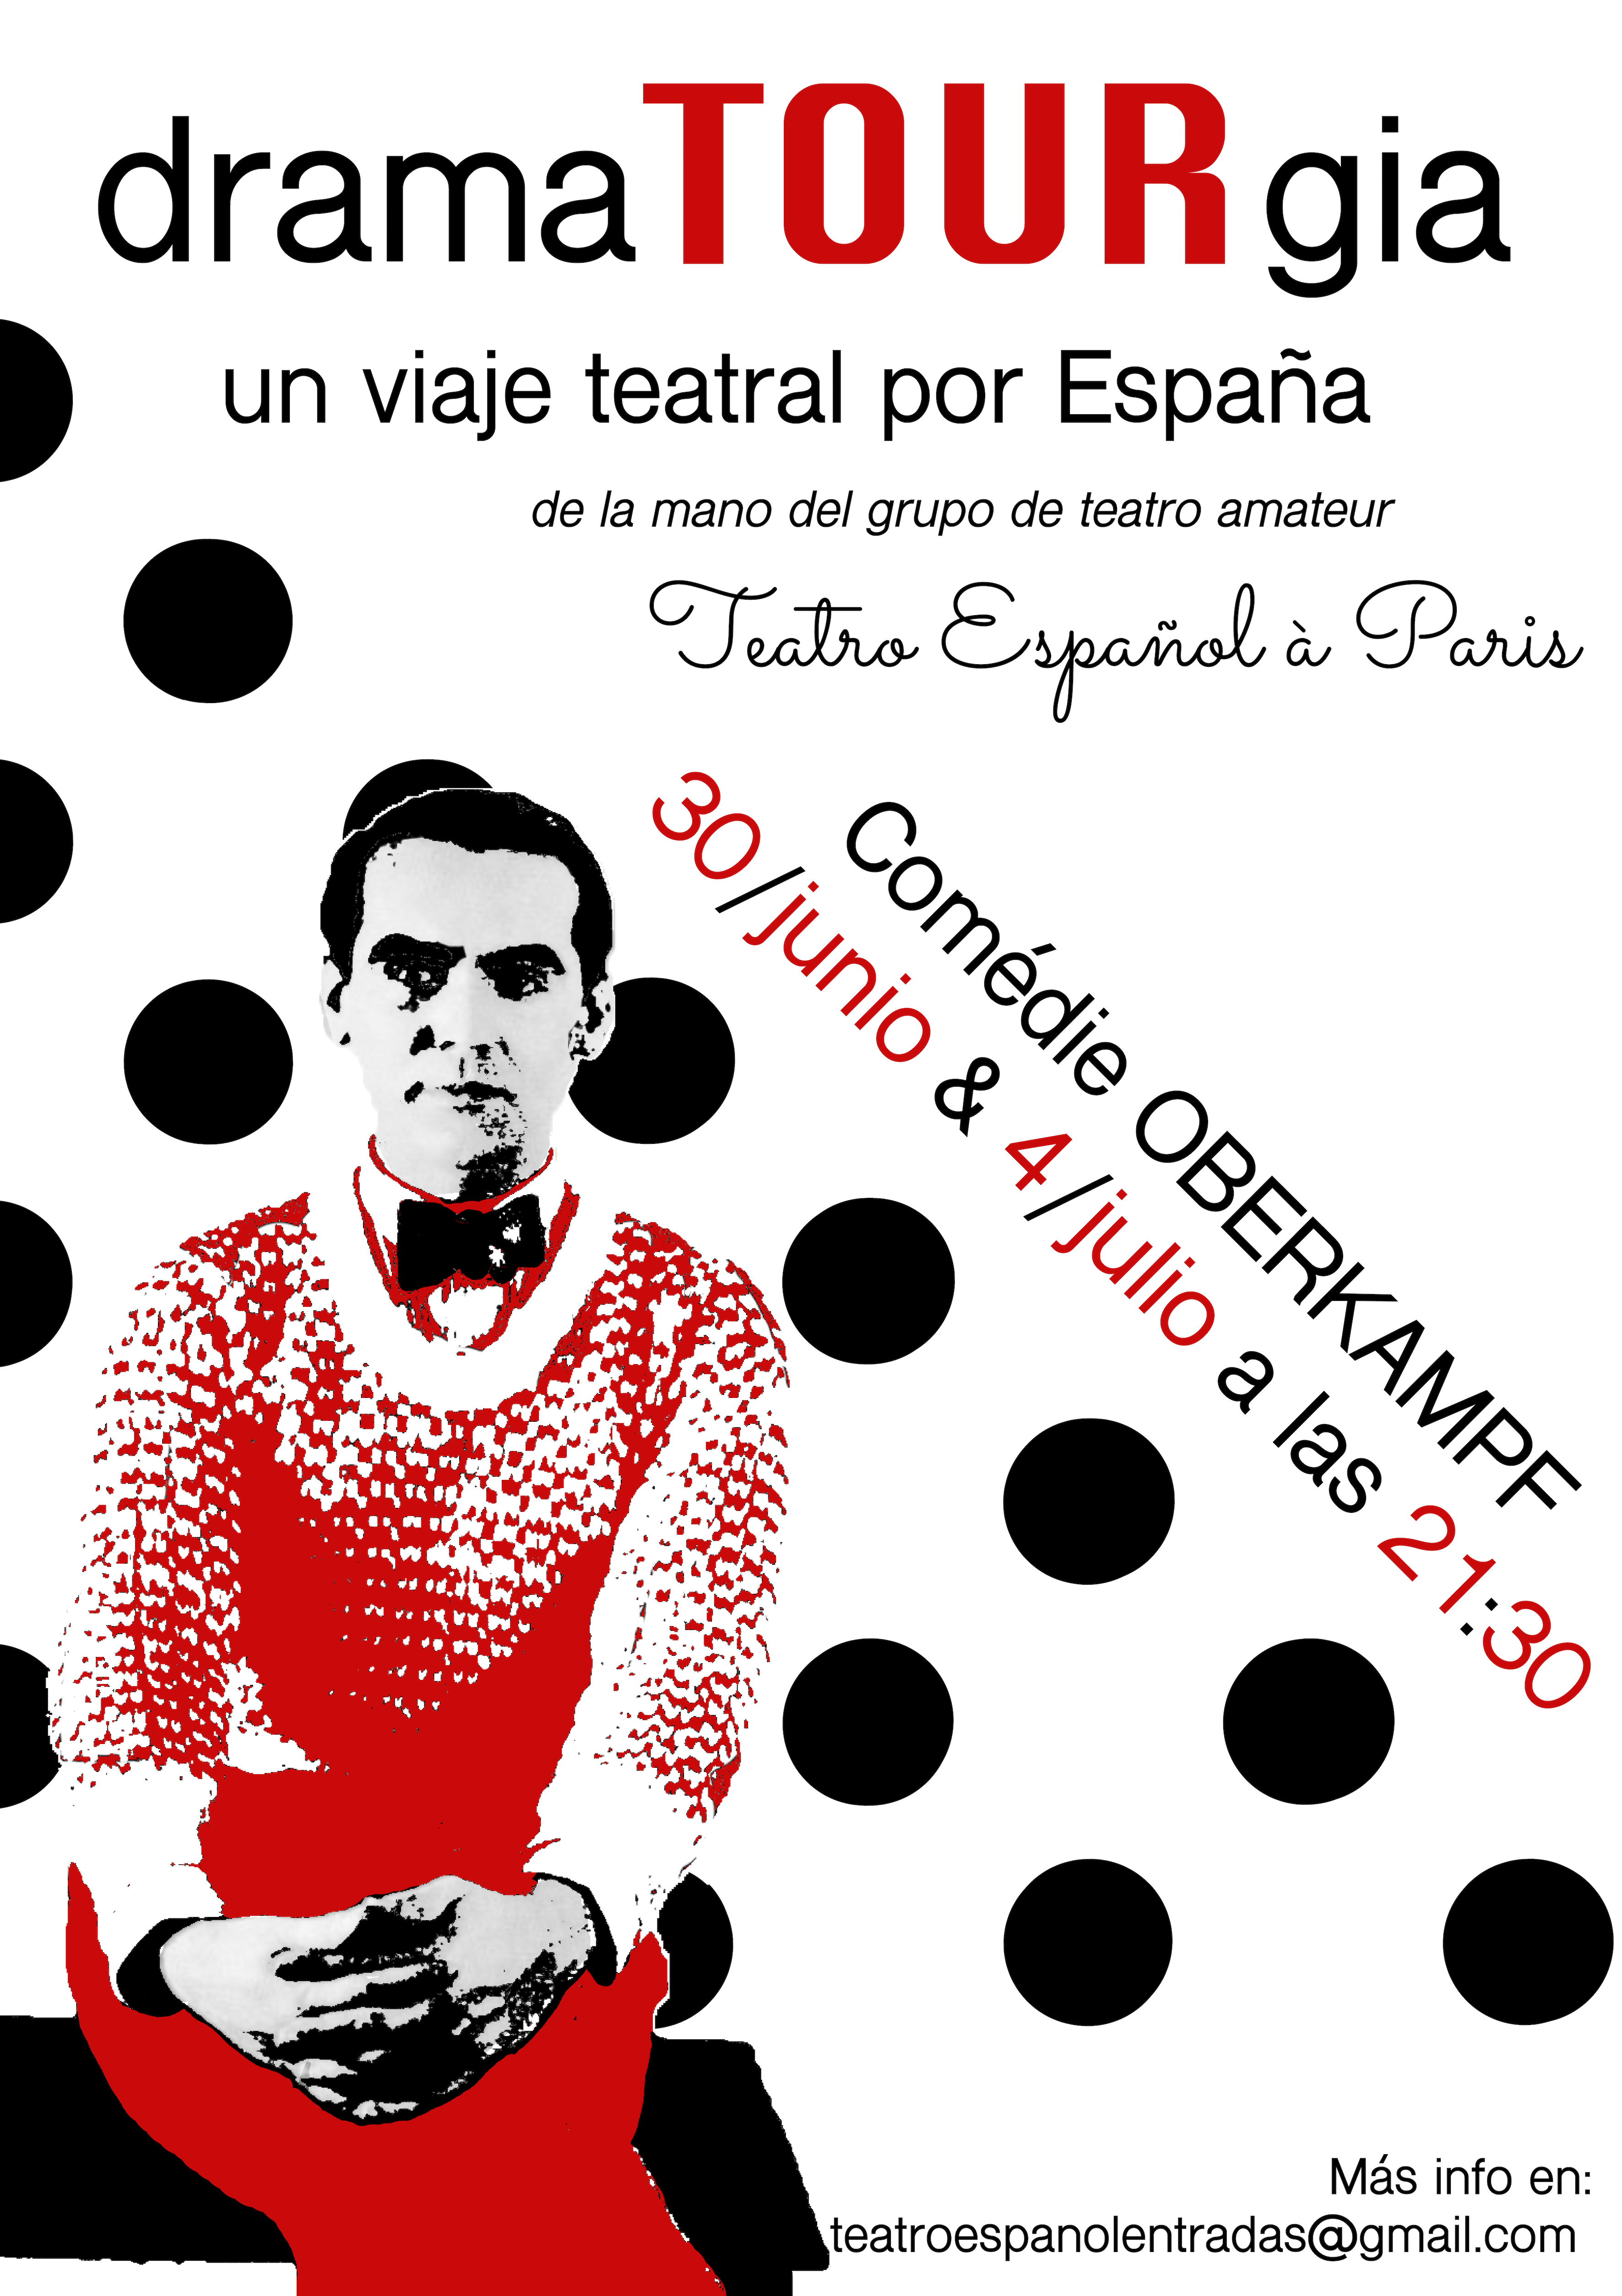 Poster of dramaTOURgia with Federico García Lorca in the image